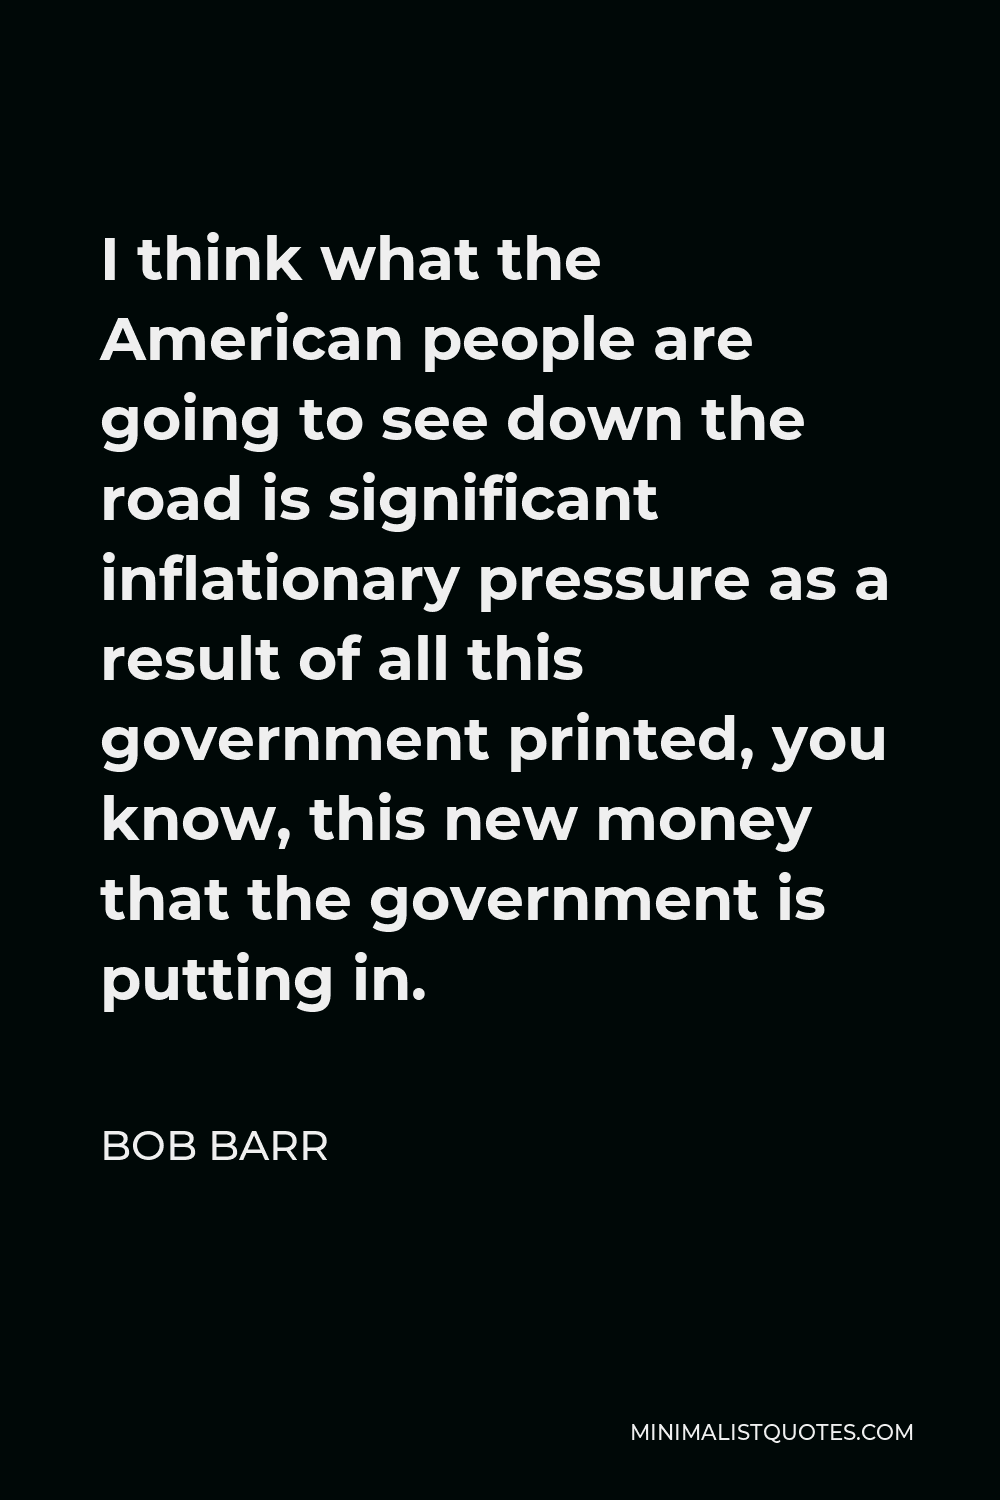 Bob Barr Quote - I think what the American people are going to see down the road is significant inflationary pressure as a result of all this government printed, you know, this new money that the government is putting in.